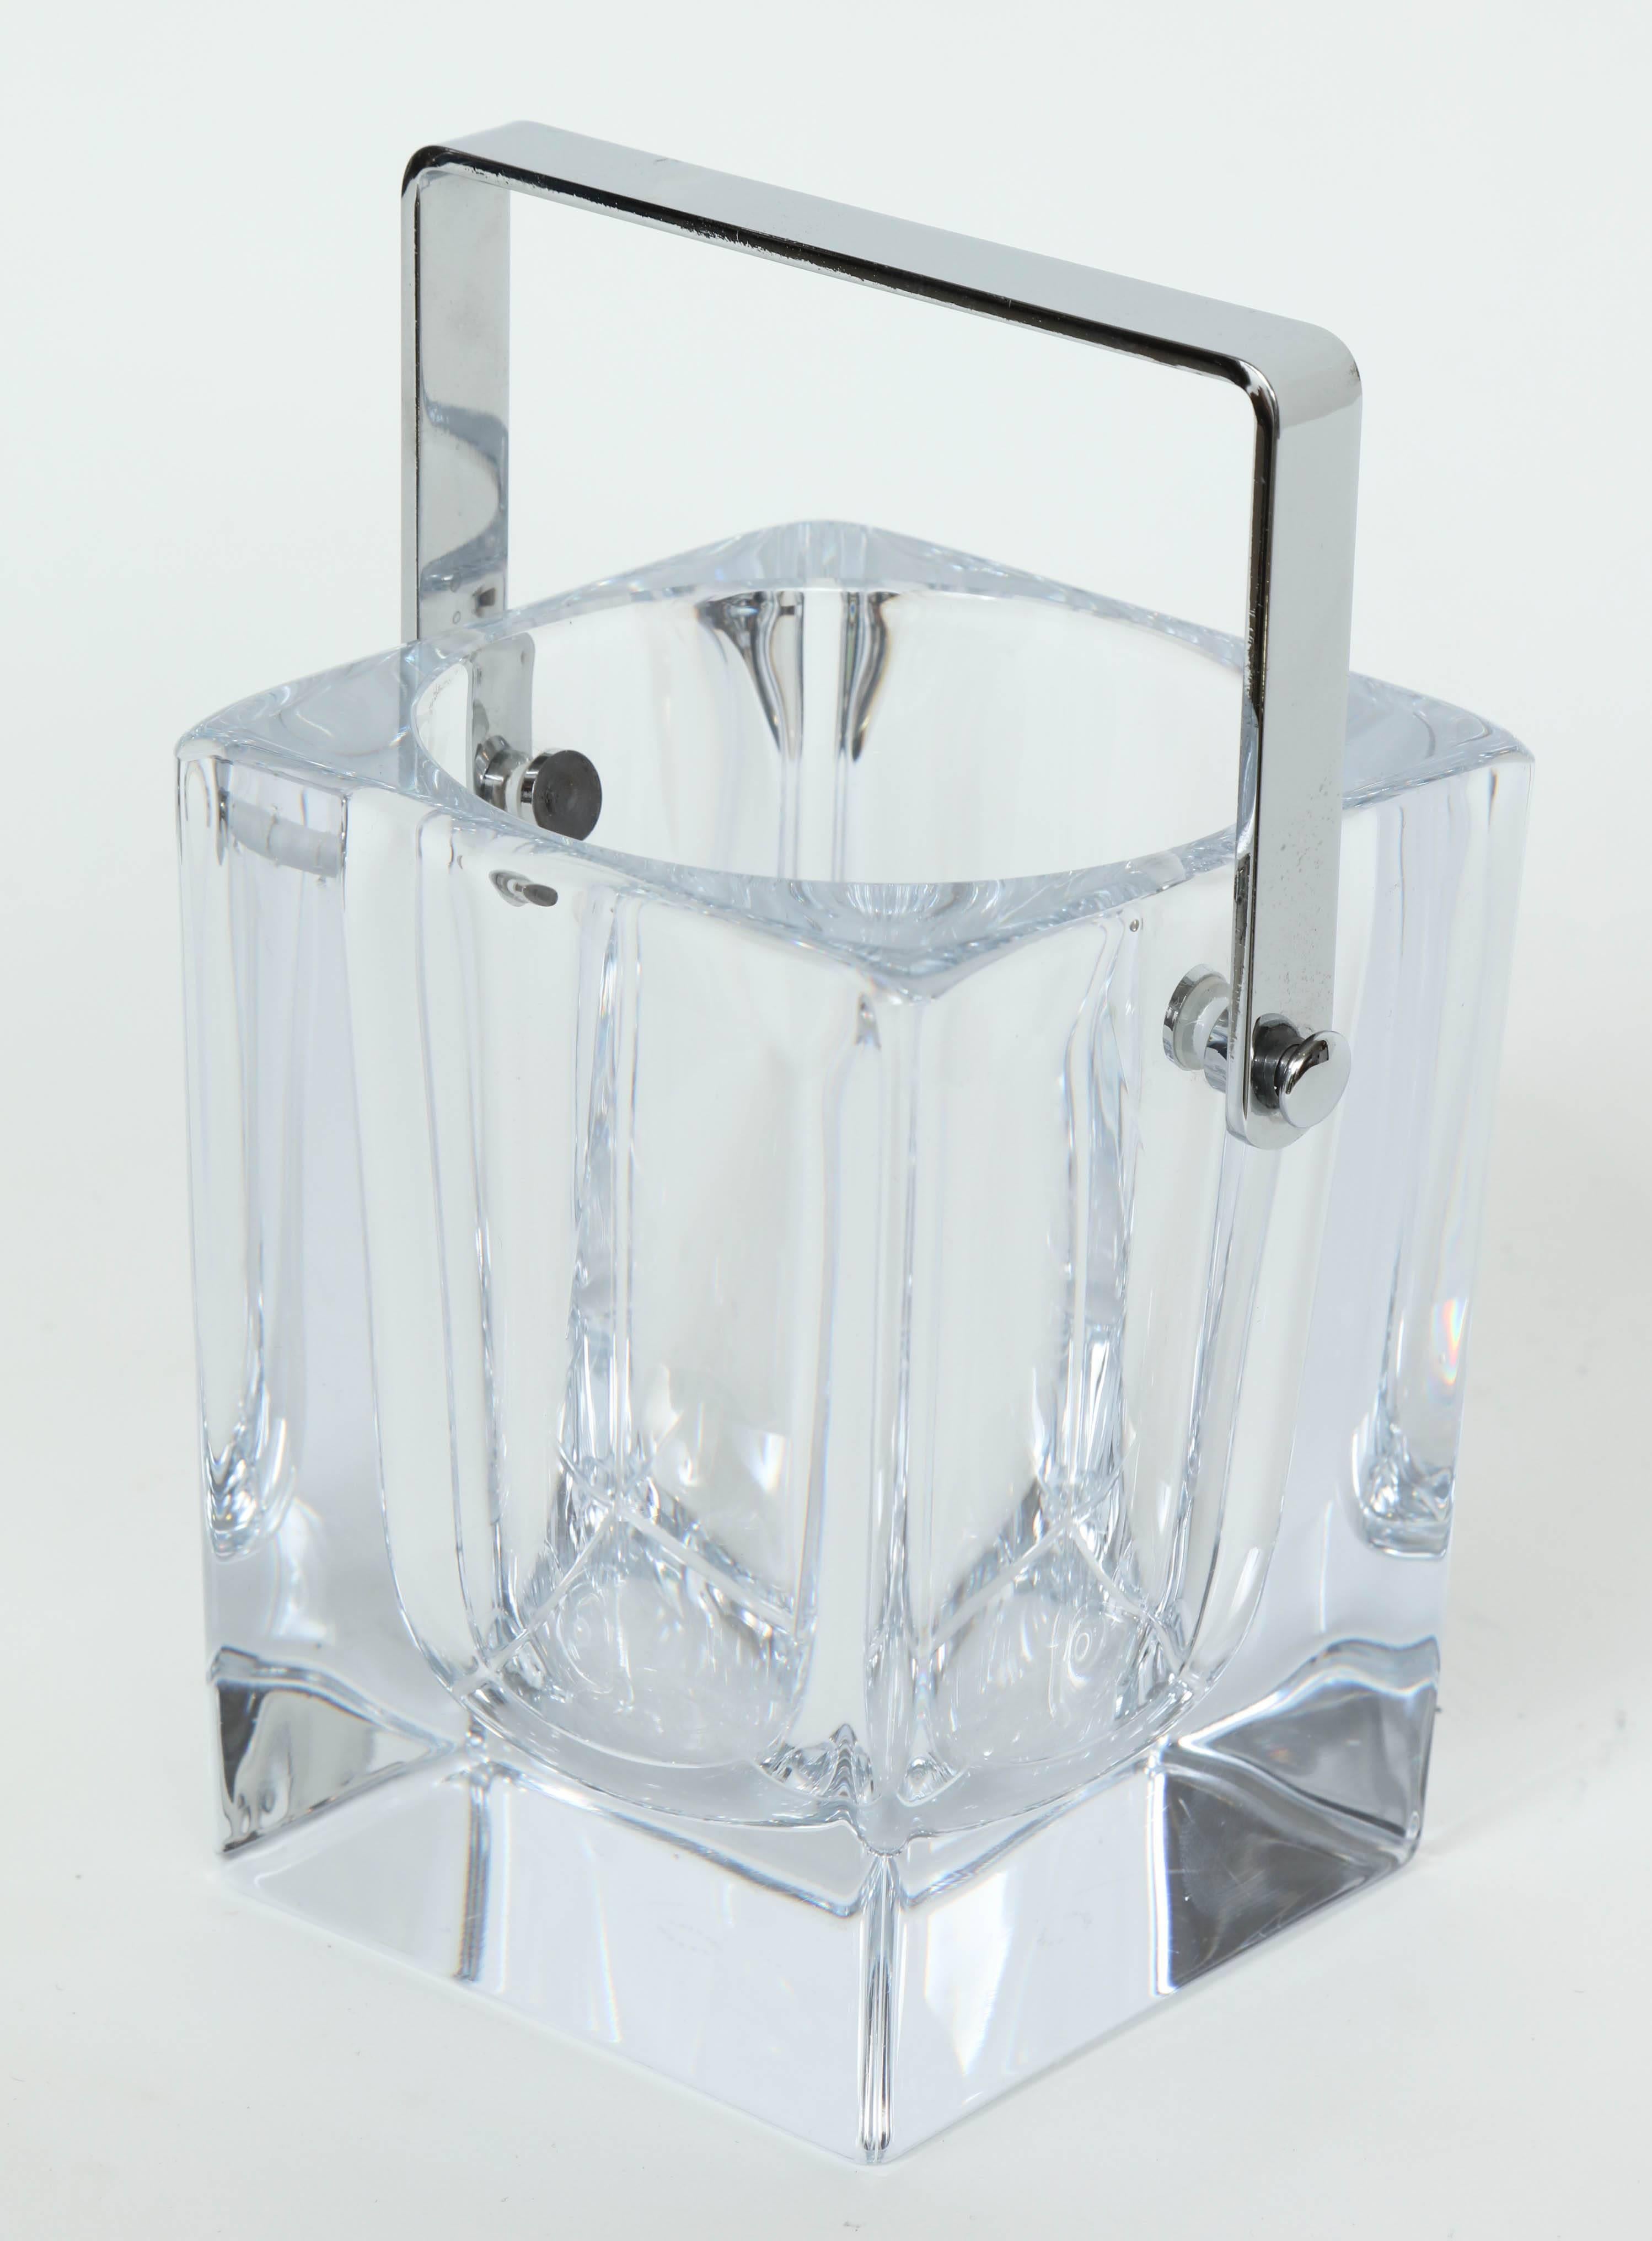 Modernist crystal ice pail with a chromed handle by Vannes. Great for ice or your favourite bar condiment.